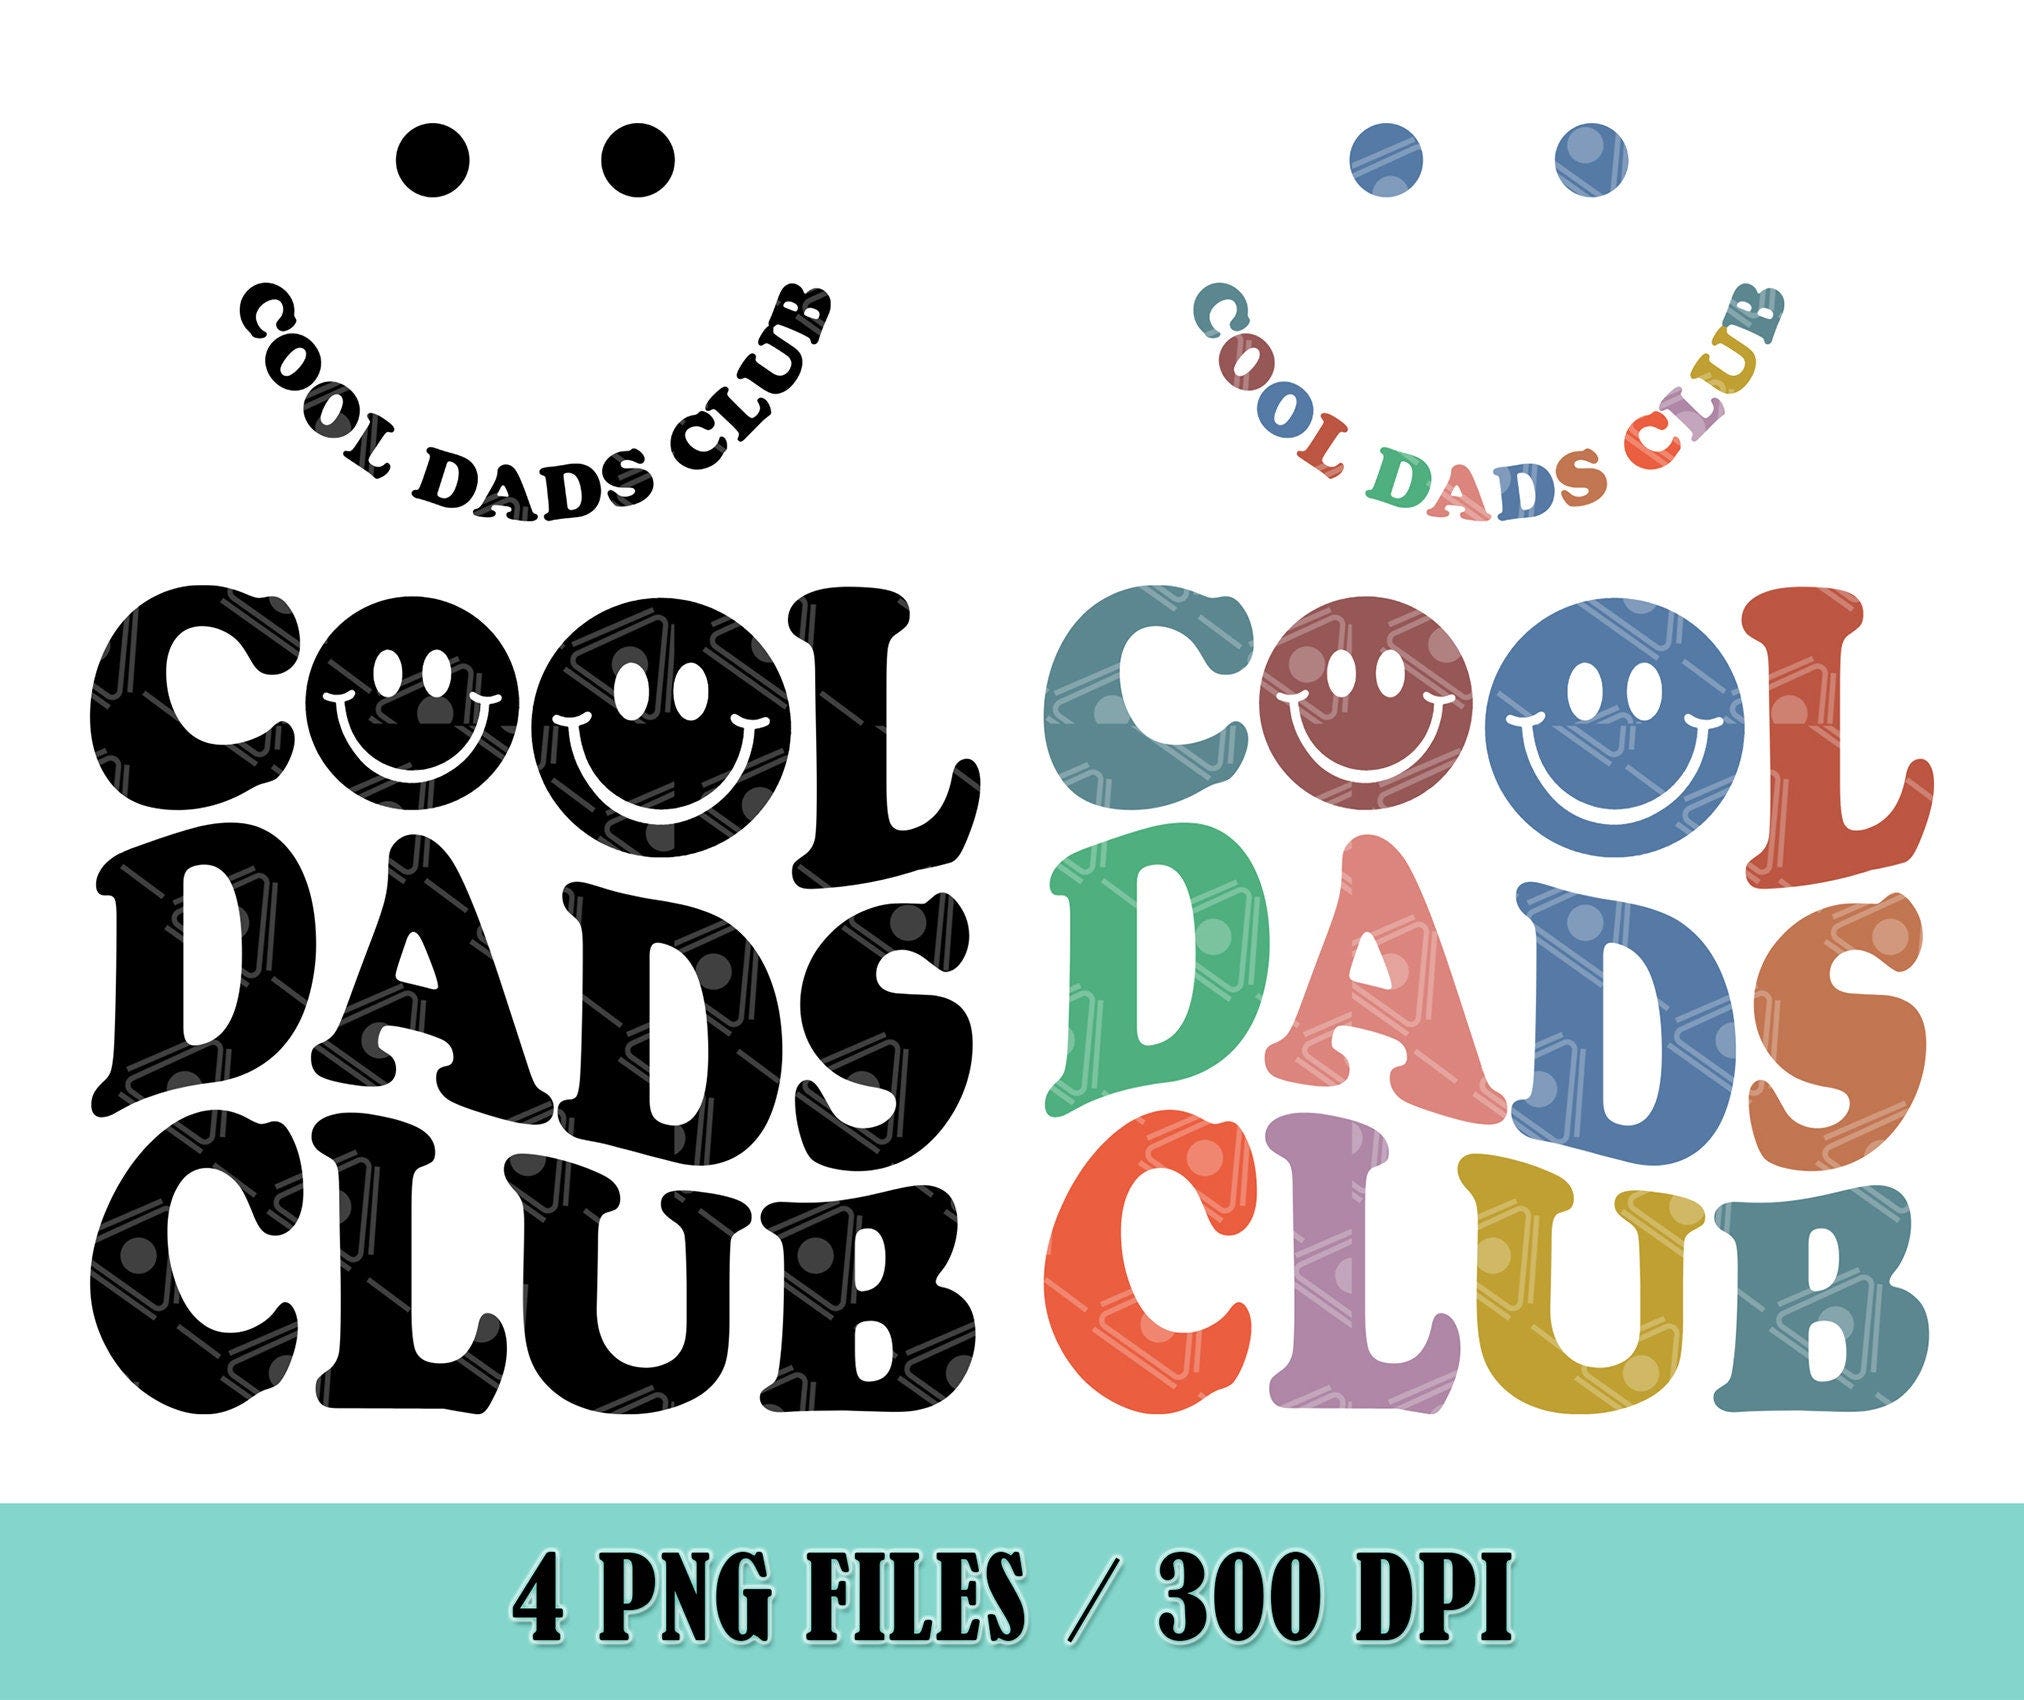 Cool Dads Club PNG Download, Dads To Be PNG, Trendy Dads Svg, Dad Birthday Gift, Best Dads Png, Father